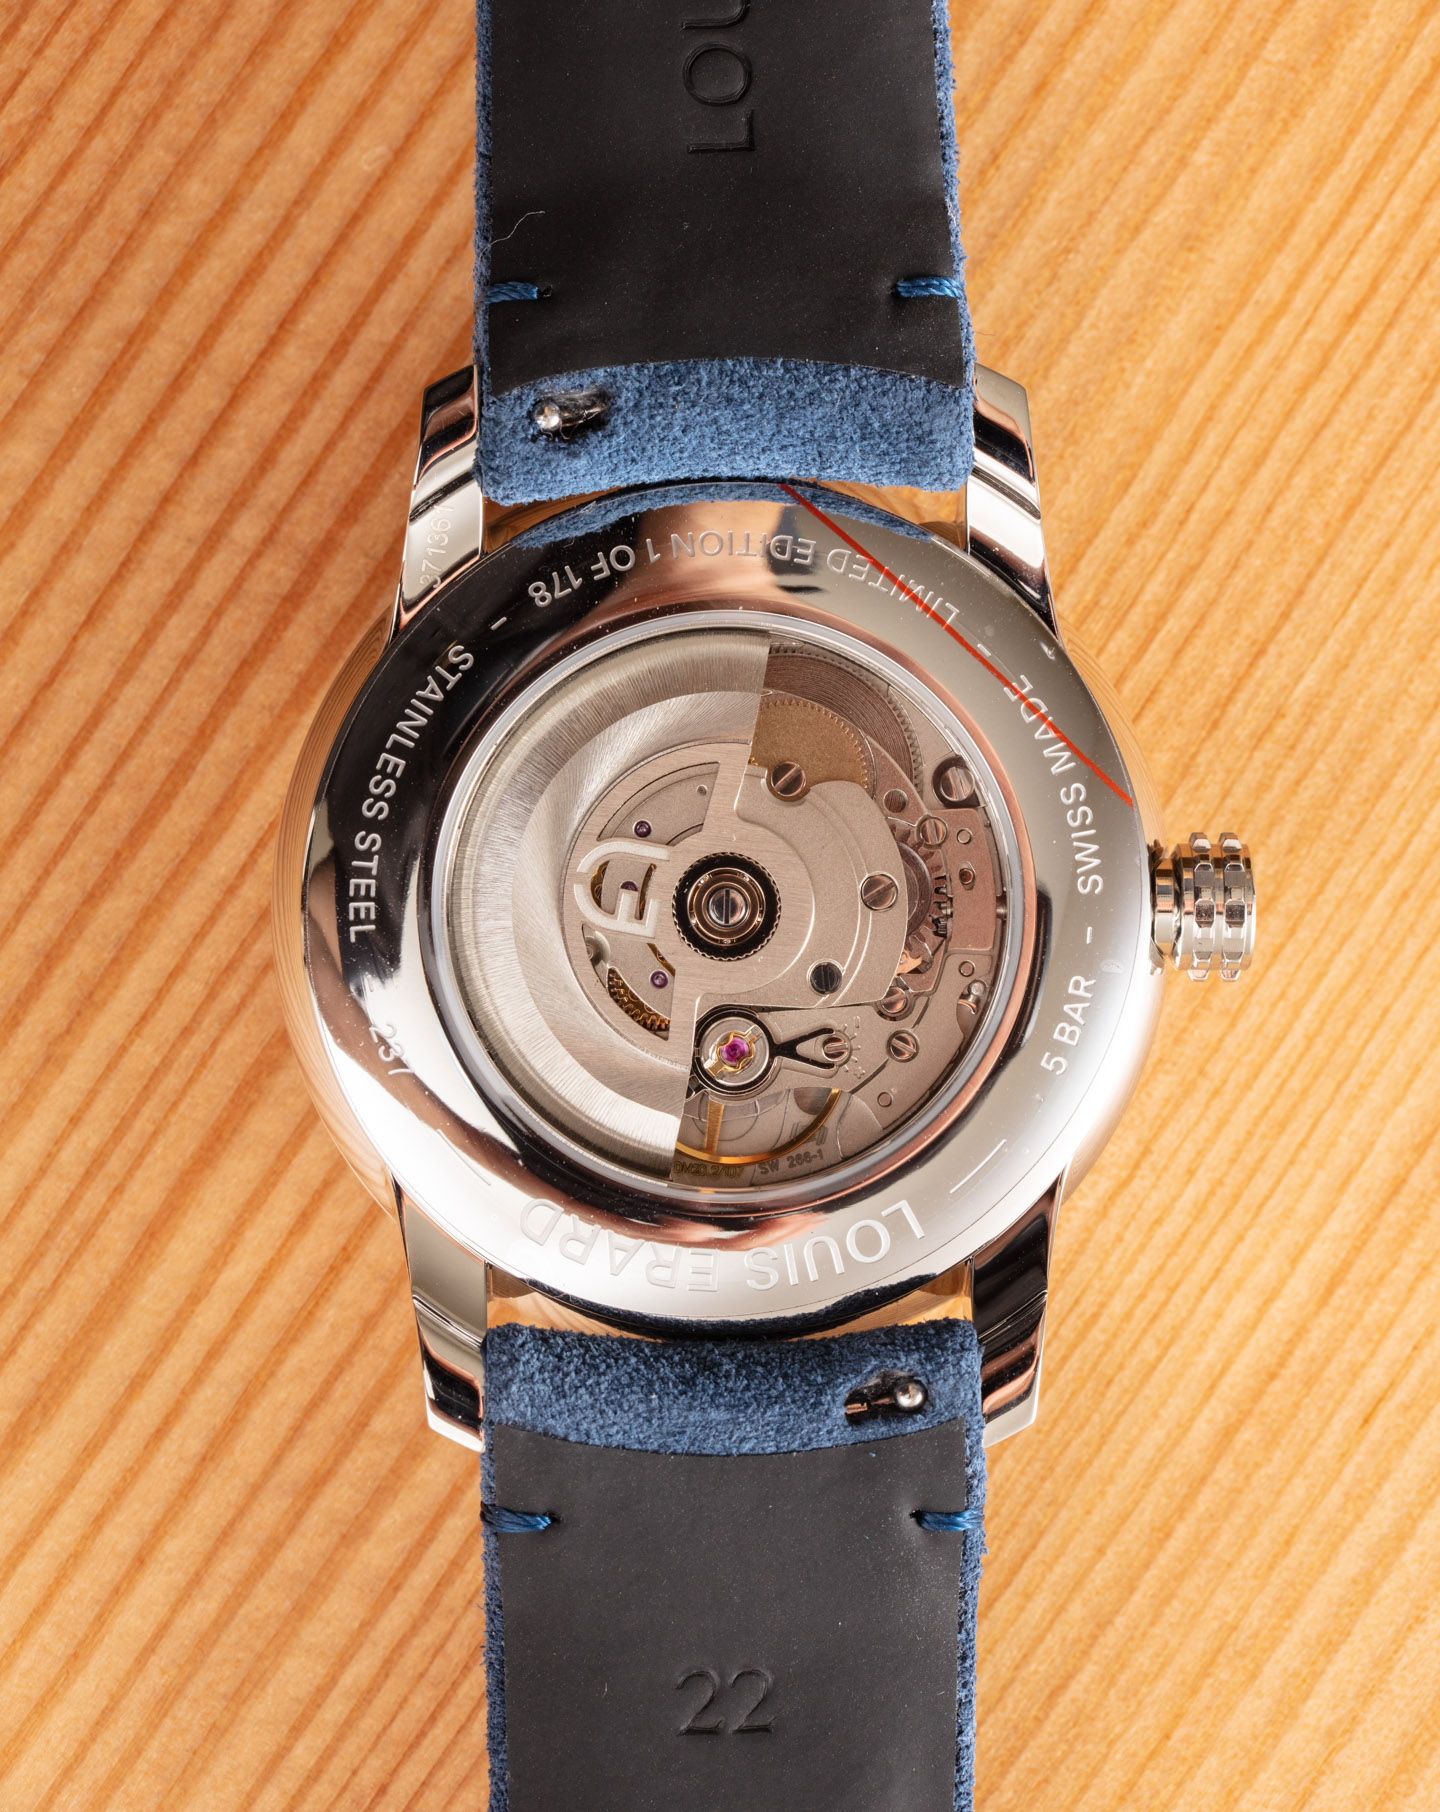 Affordable Swiss Luxury Watches: Louis Erard (Video)